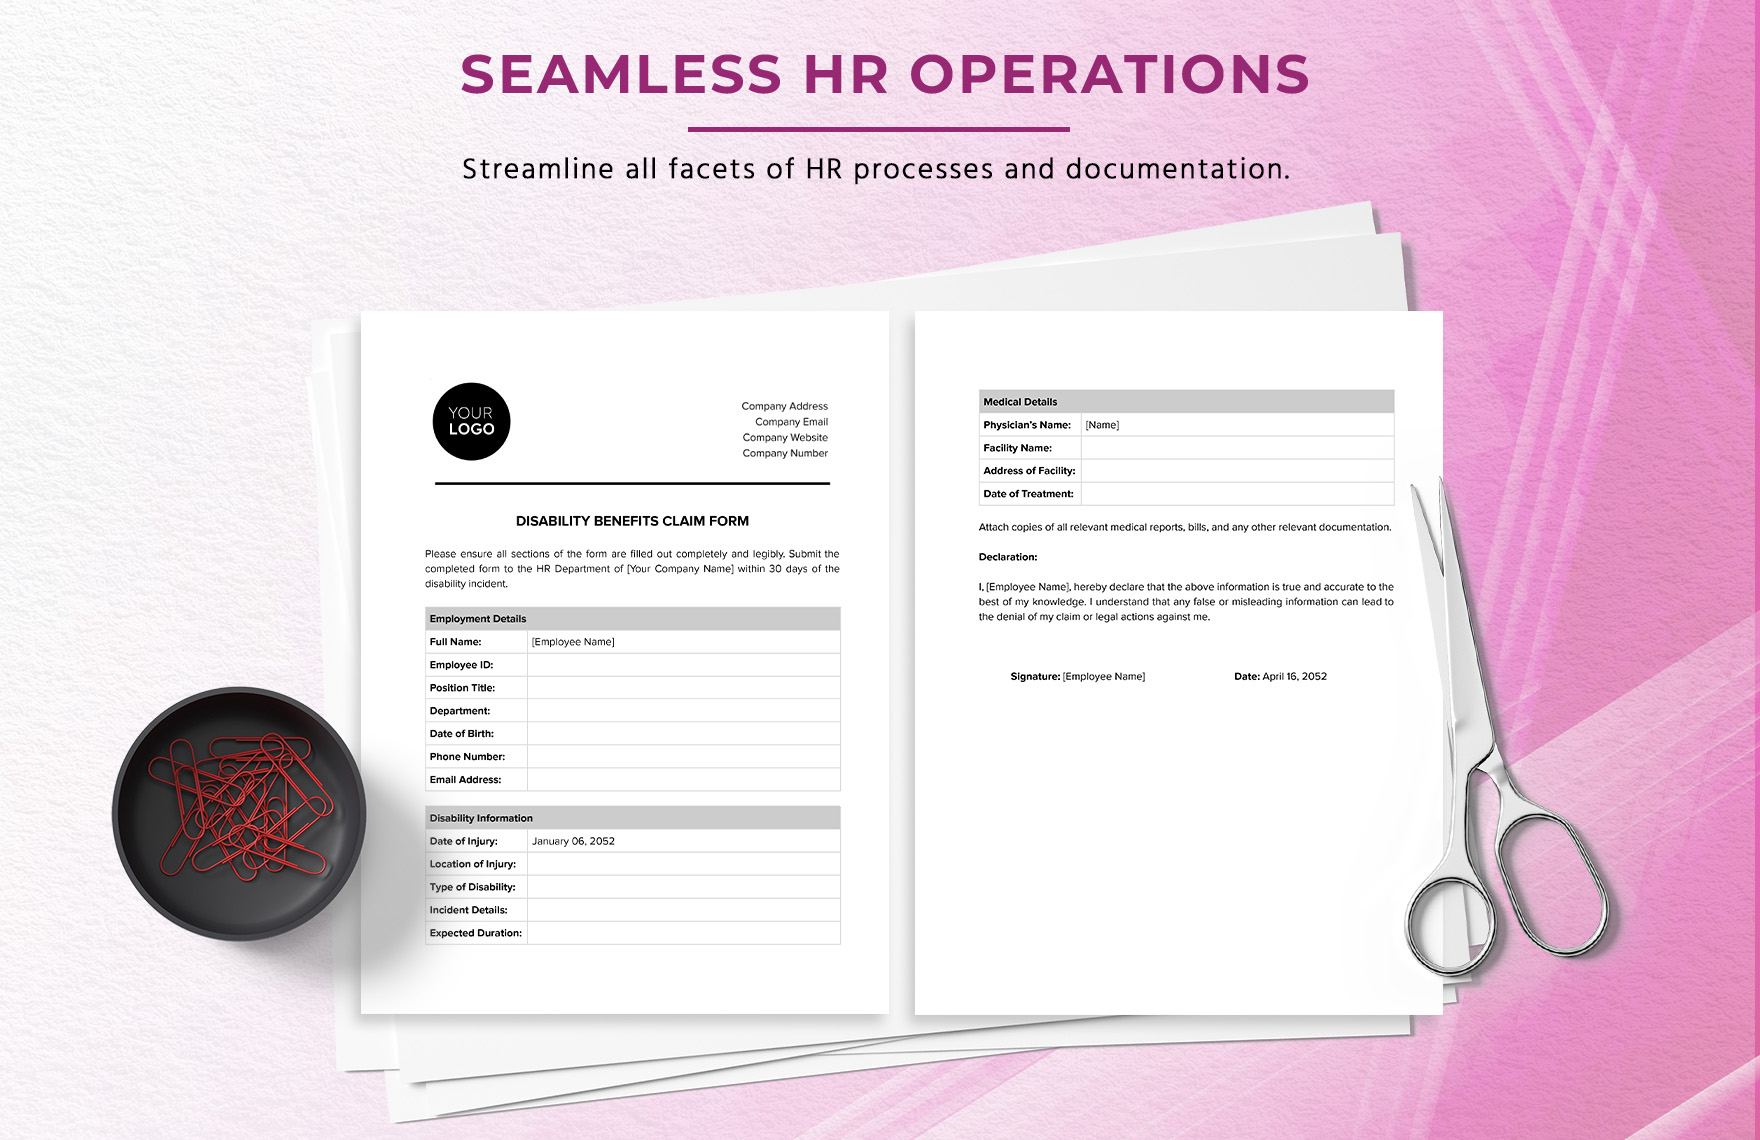 Disability Benefits Claim Form HR Template